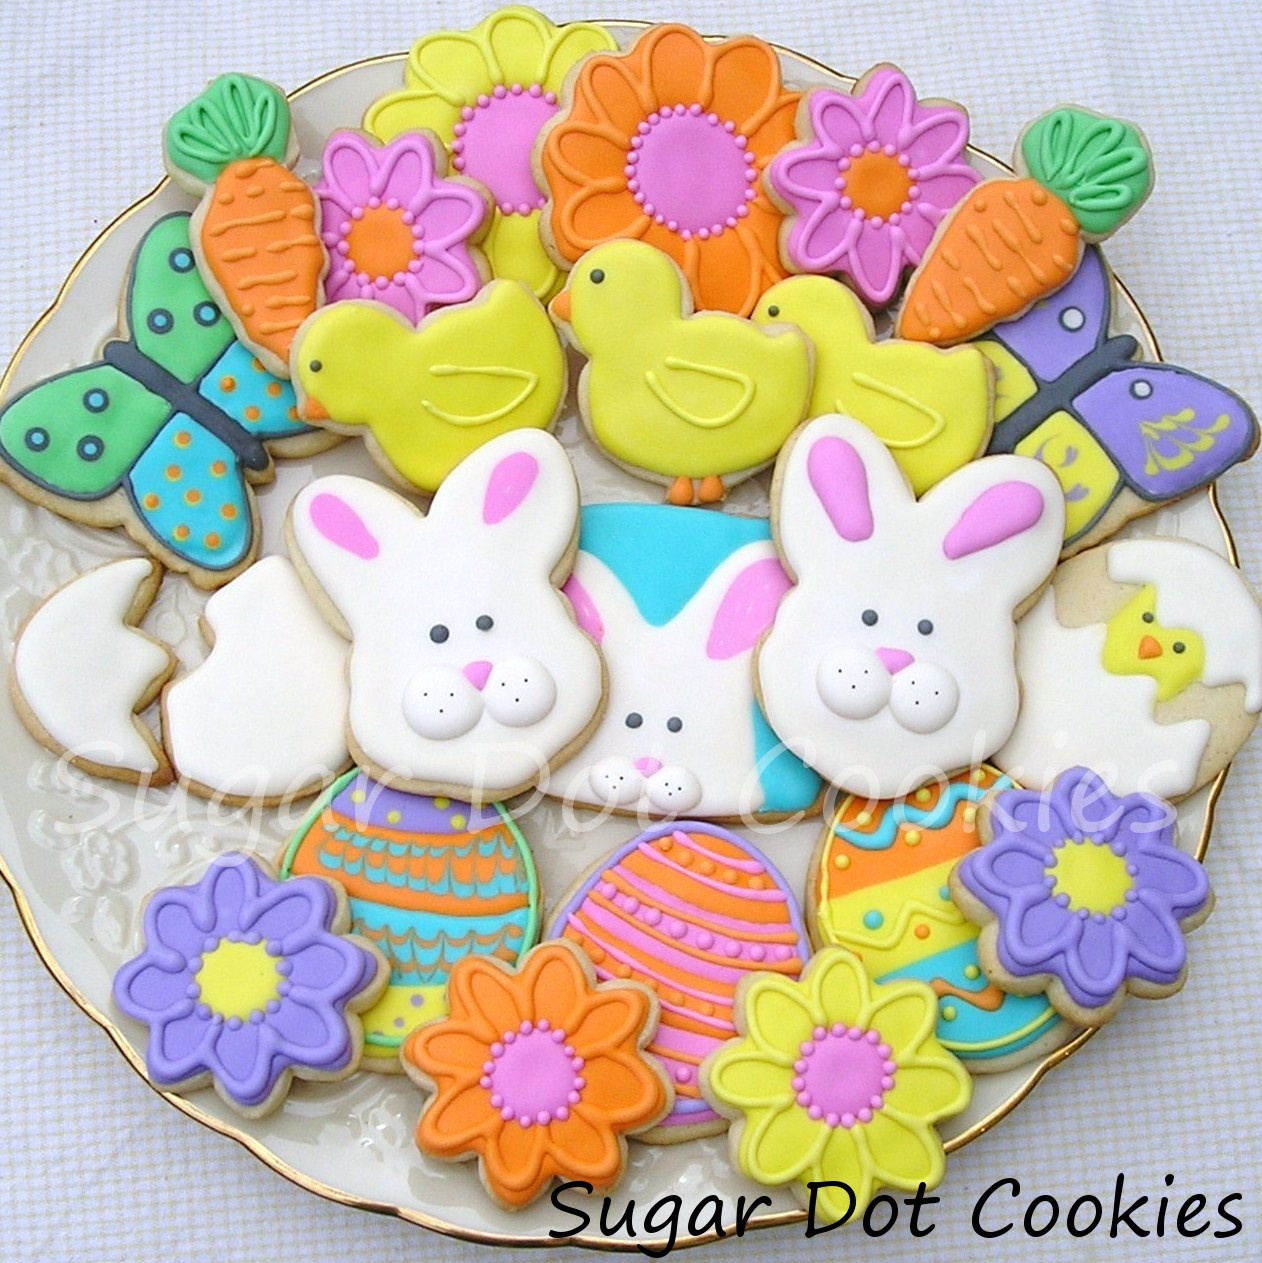 Easter Decorated Sugar Cookies
 I love the bright colors and the adorable shapes My